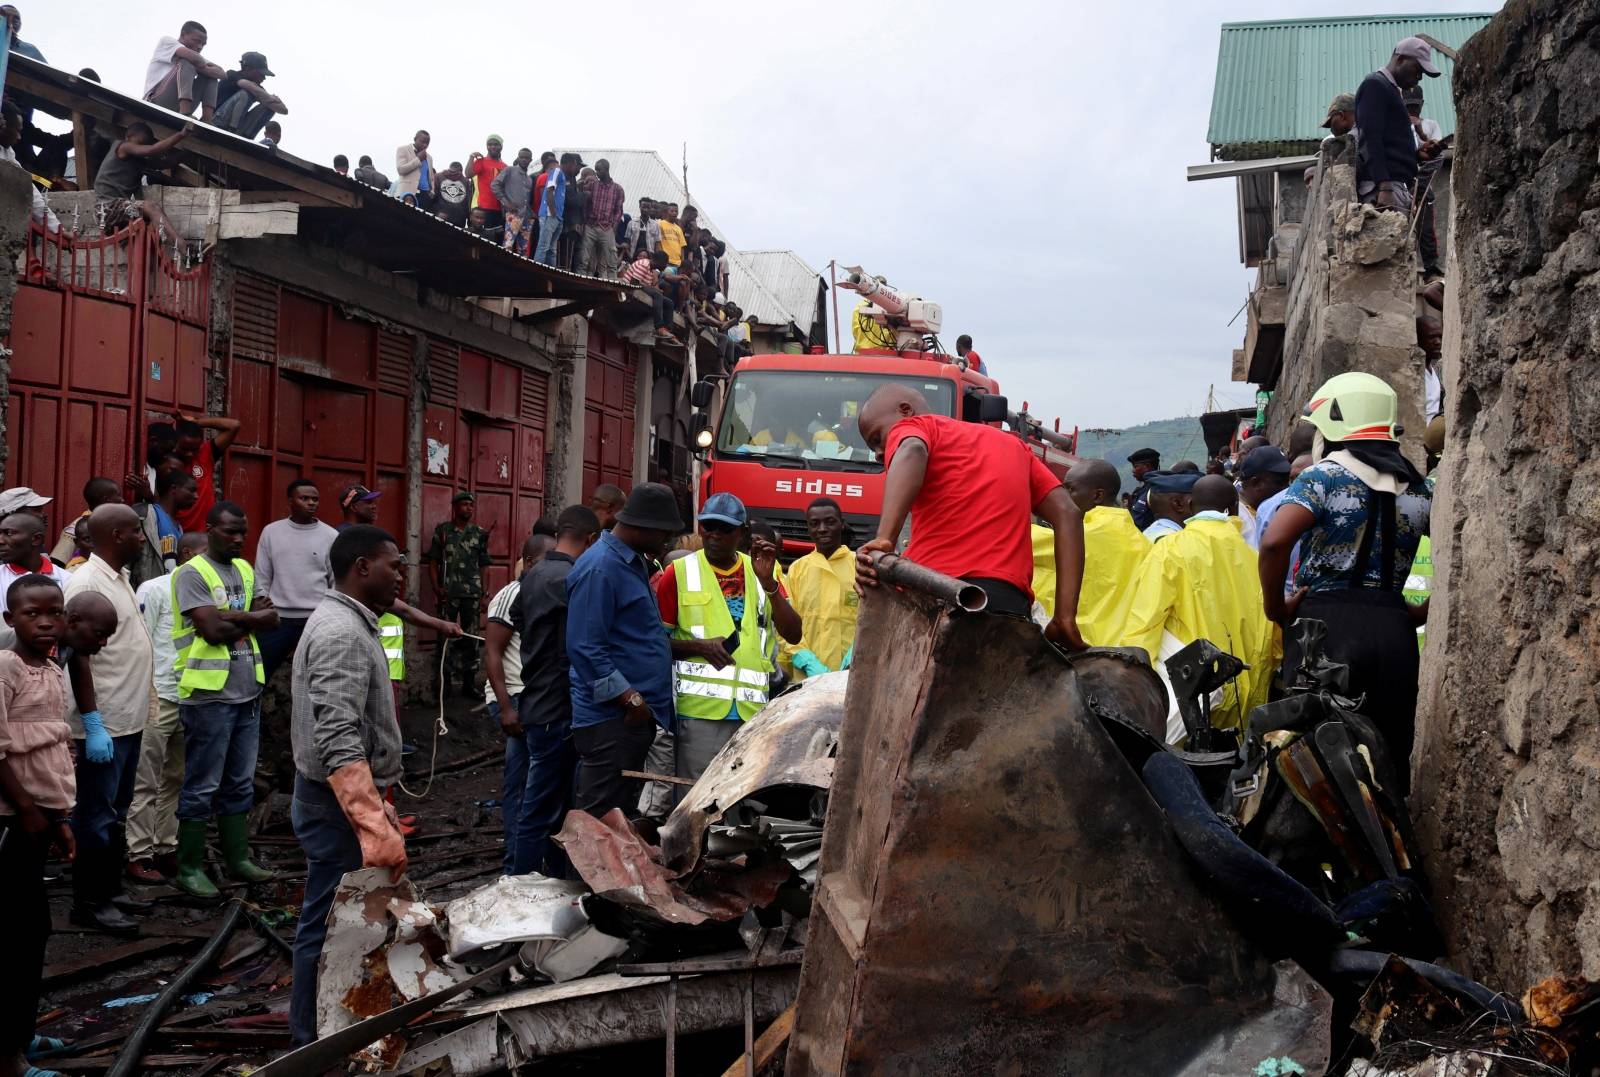 Rescuers and civilians gather at the site where a Dornier 228-200 plane operated by local company Busy Bee crashed into a densely populated neighborhood in Goma